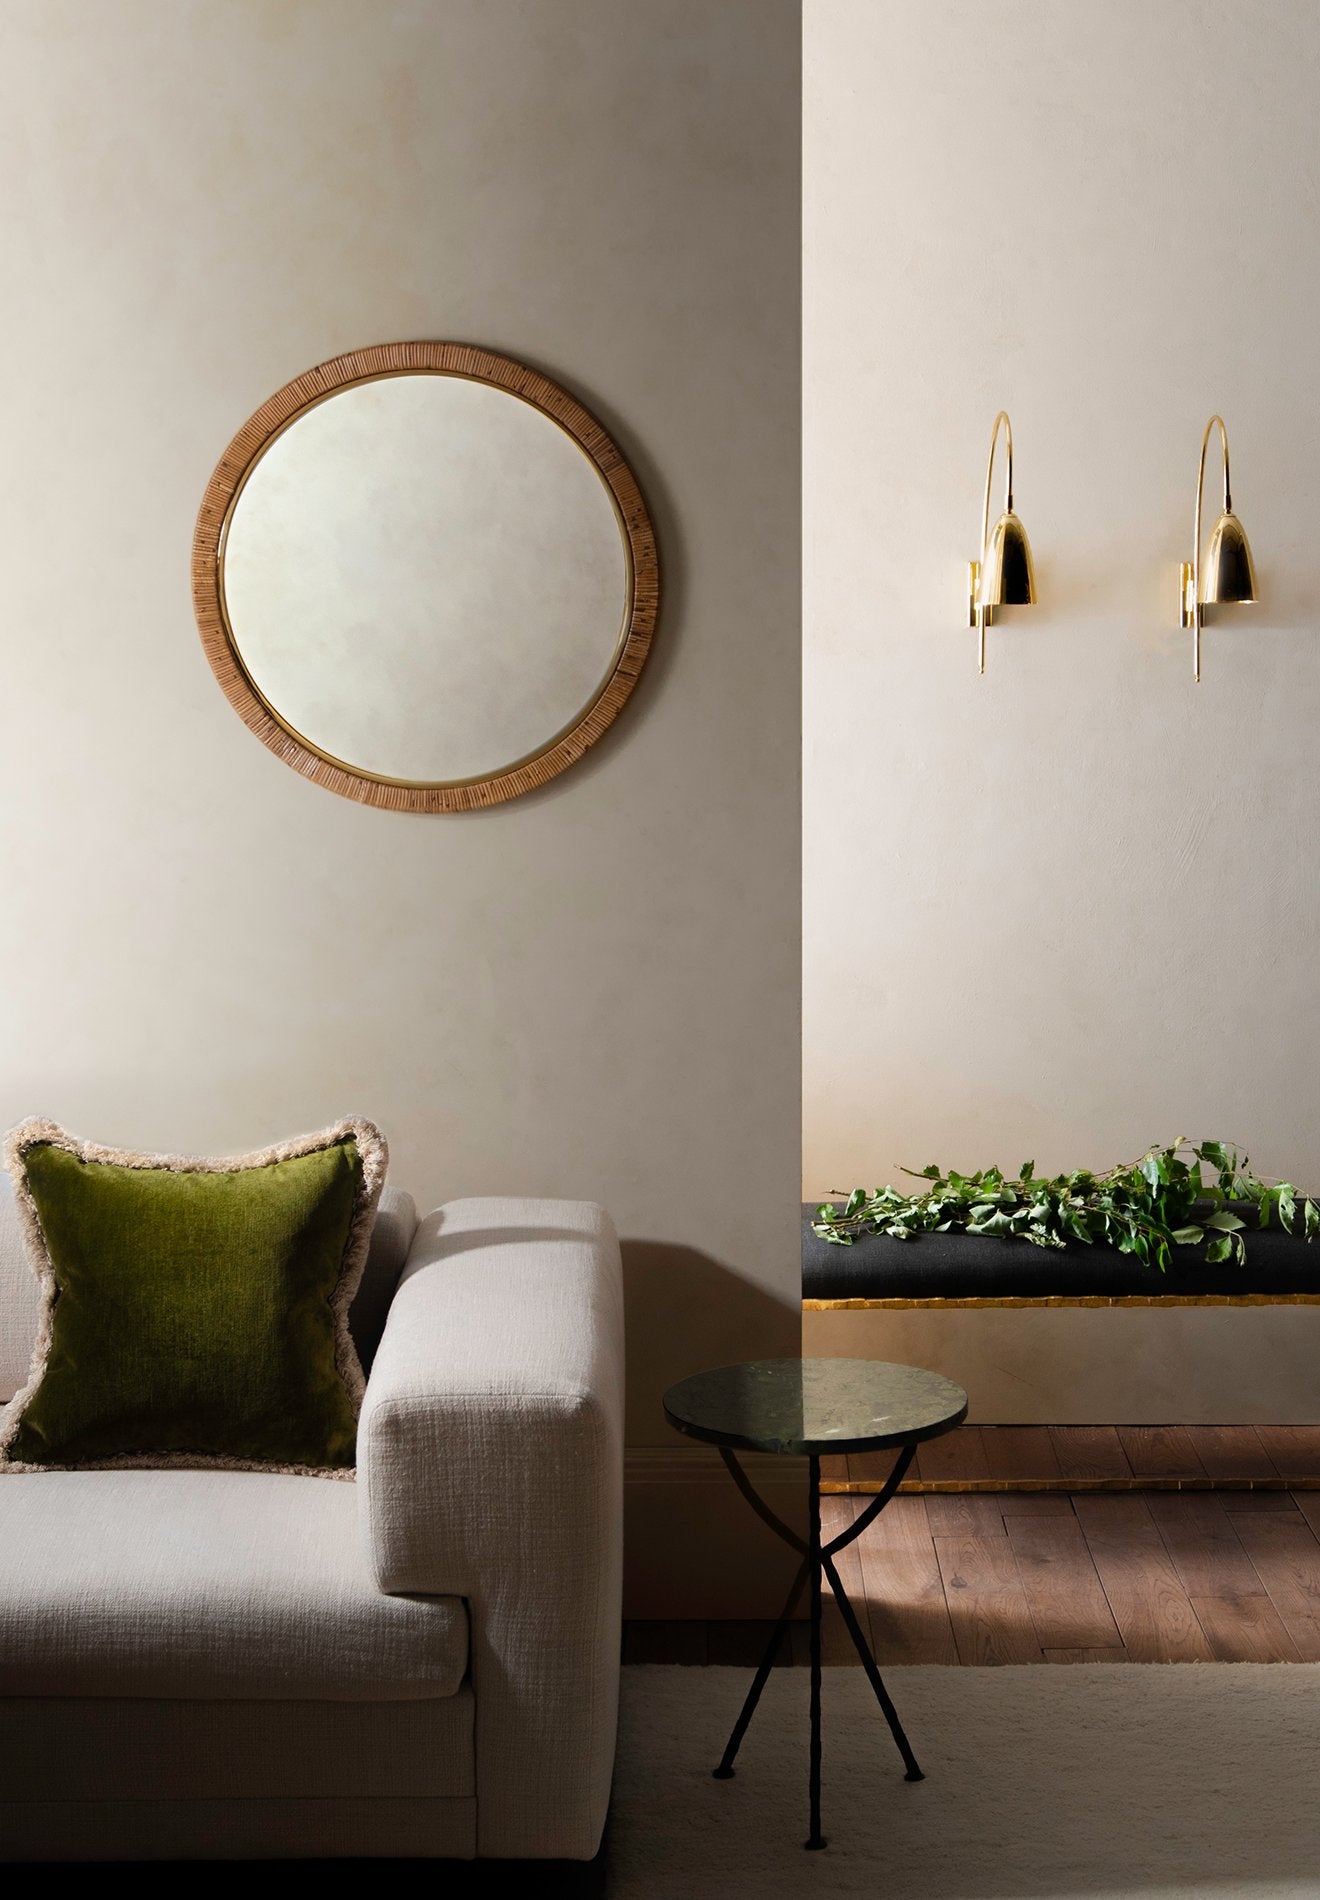 Kingsley in Gold, Giacometti Cocktail table in Carbon with Verde Fantastico, Holden Mirror